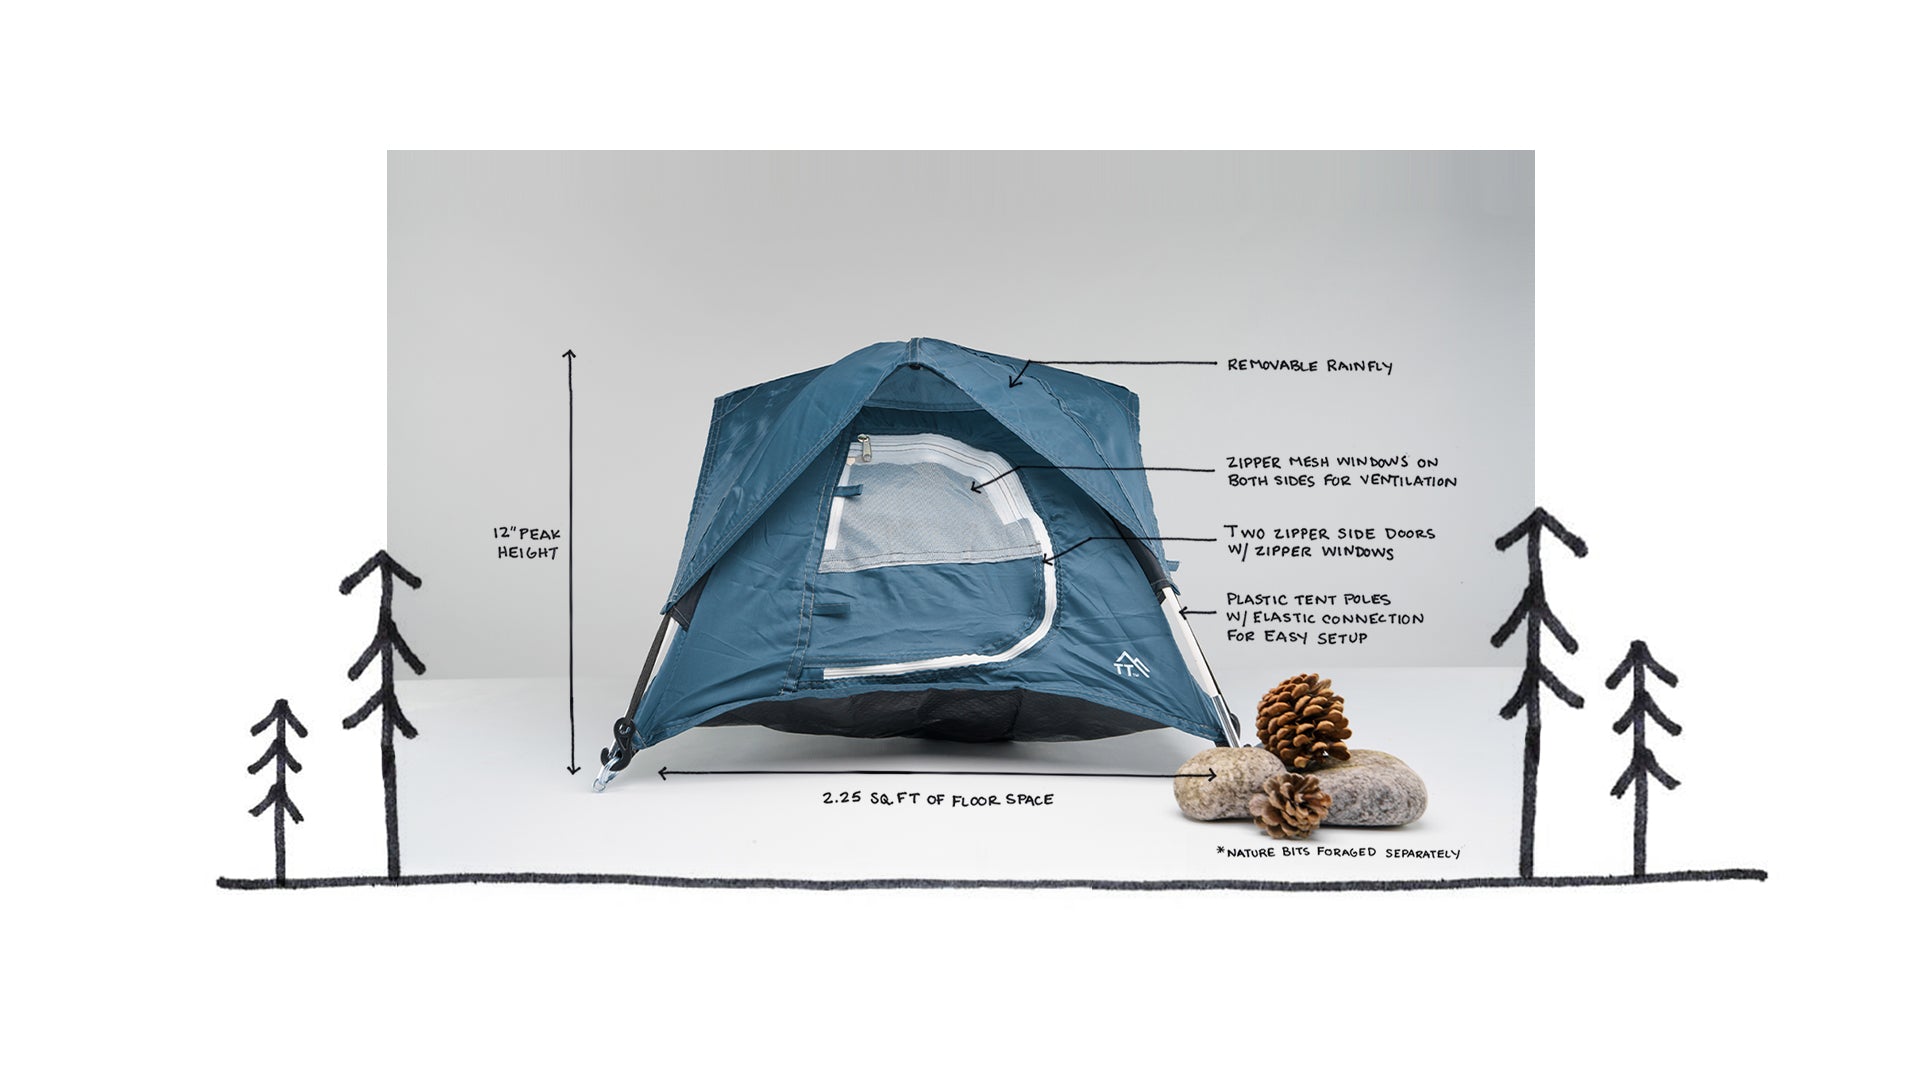 Blue tiny tent next to pinecones and rocks with tree drawings and text that reads: 12" peak height, 2.25 sq.ft. of floor space, removable rainfly, zipper mesh windows on both sides for ventilation, two zipper side doors w/ zipper windows, plastic tent poles w/ elastic connection for easy setup